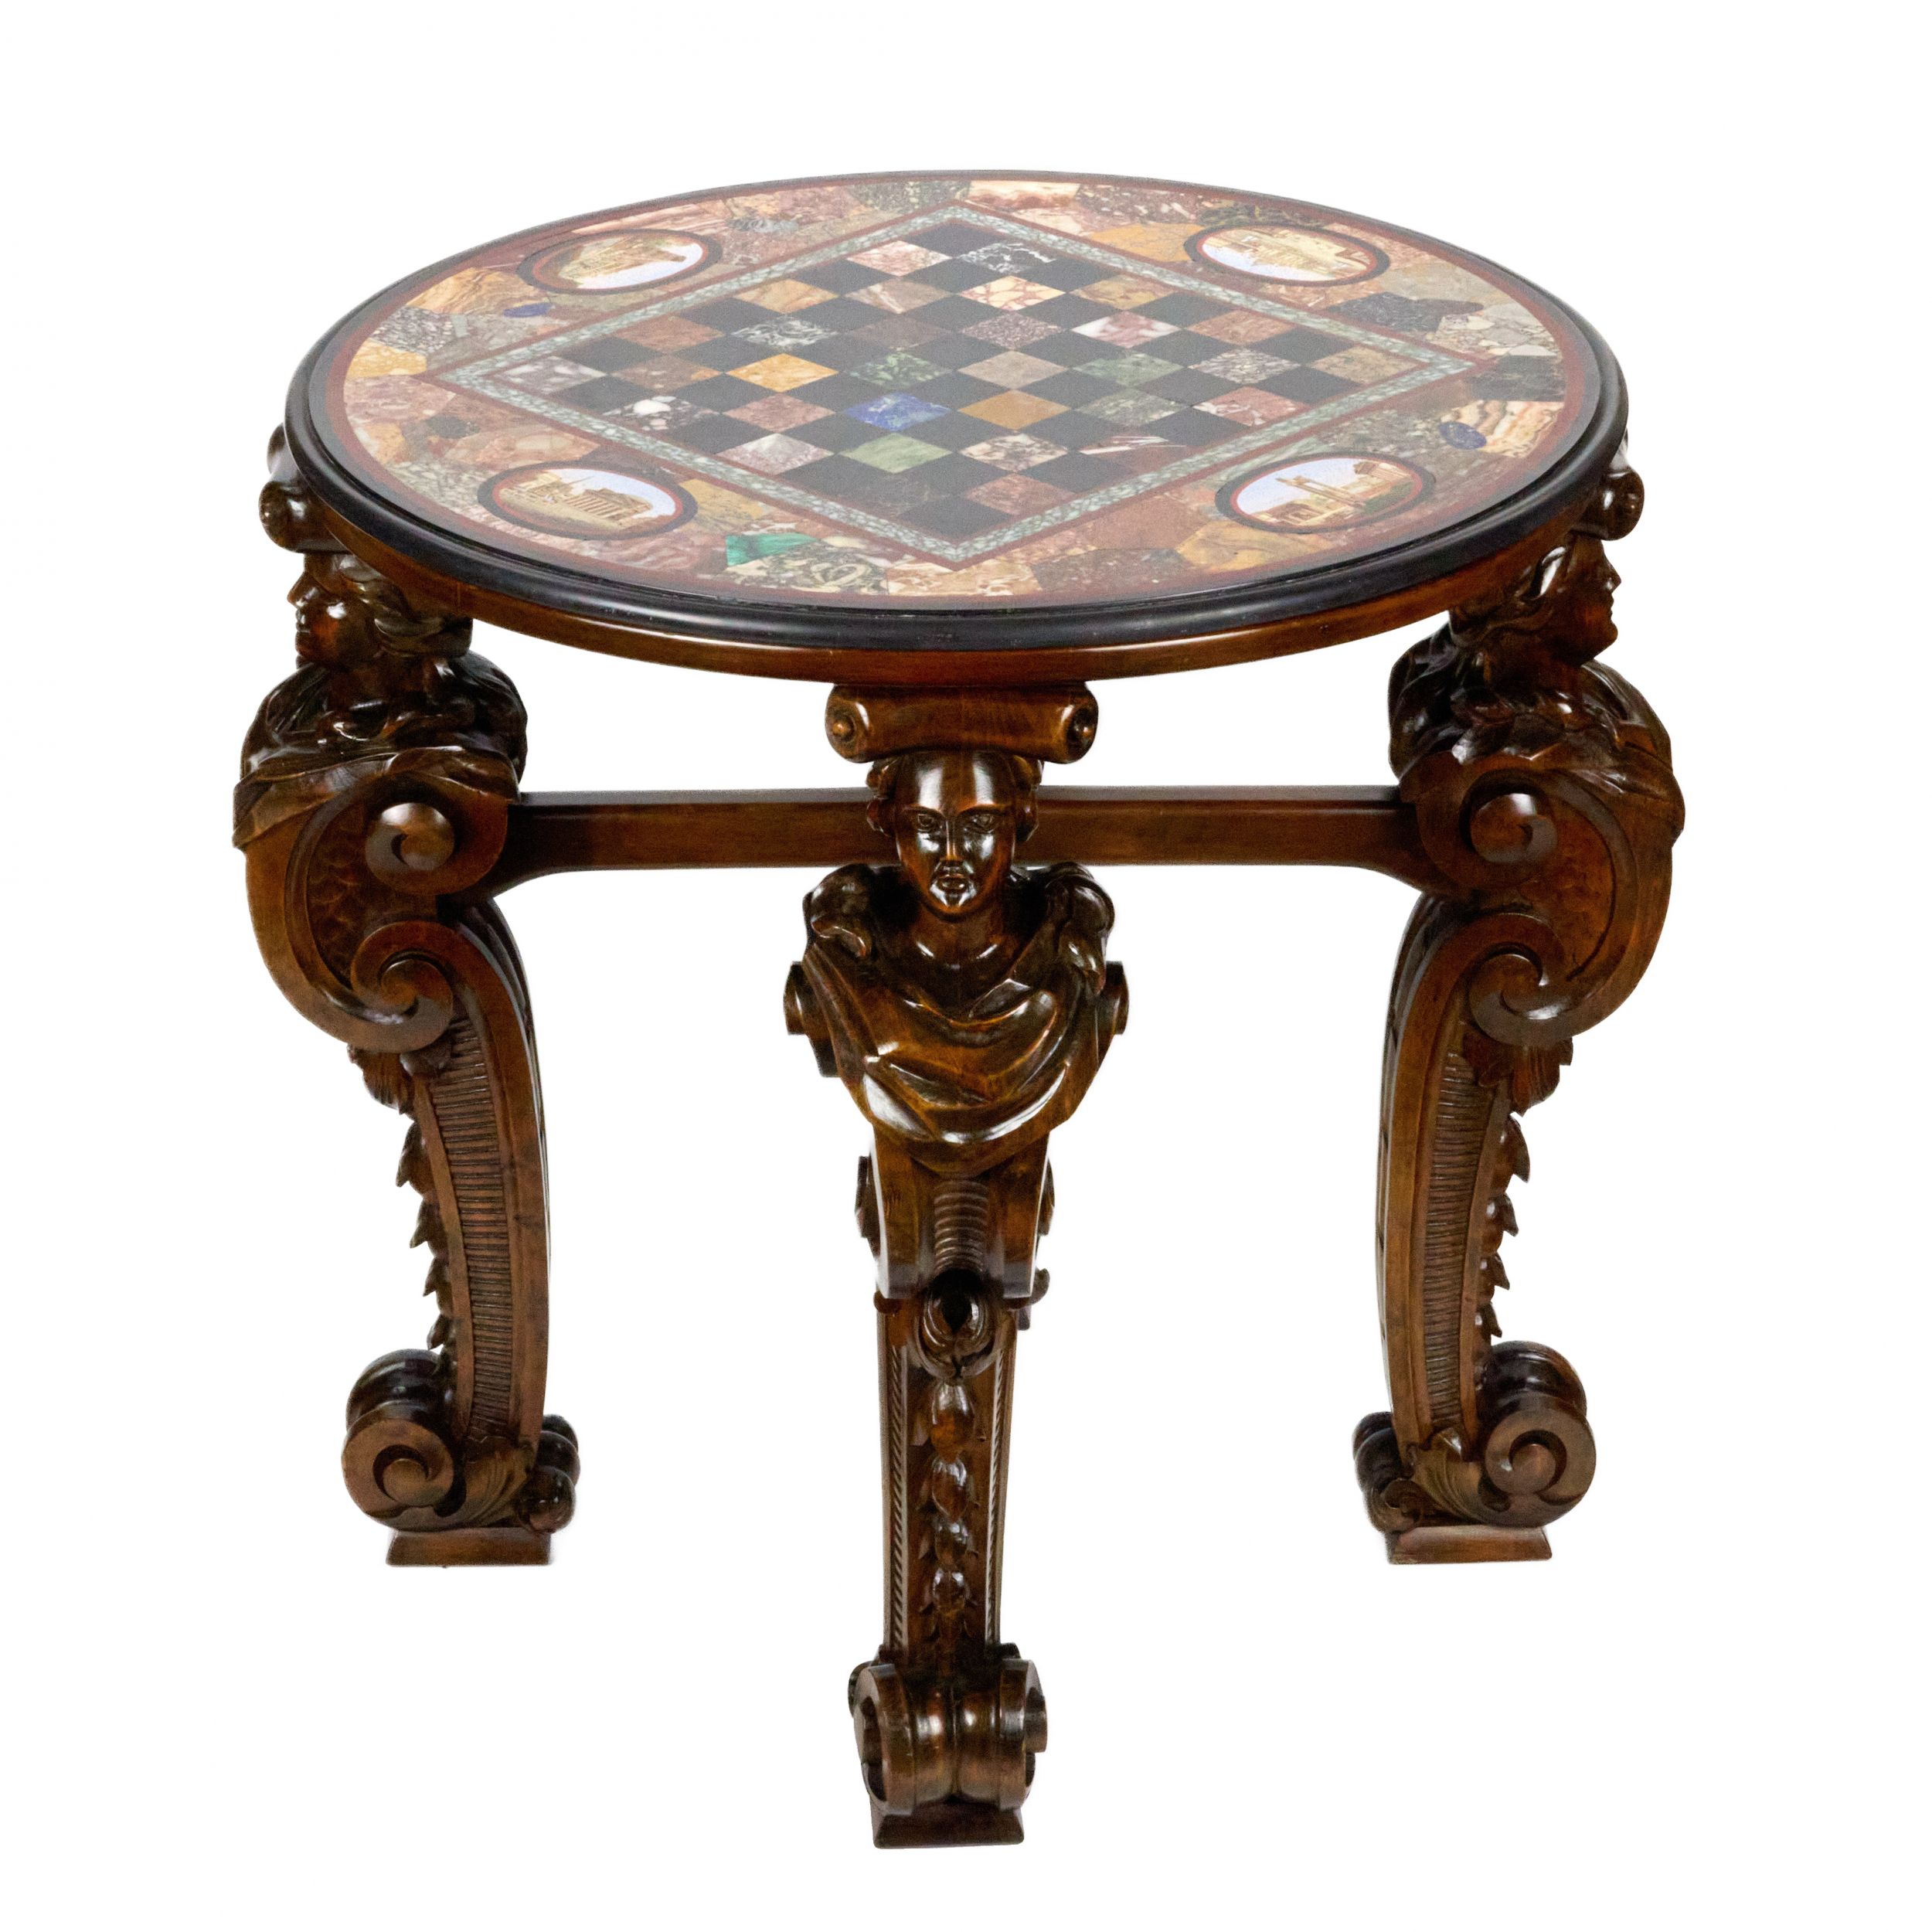 An impressive chess table with precious Roman mosaics on carved legs. - Image 3 of 10